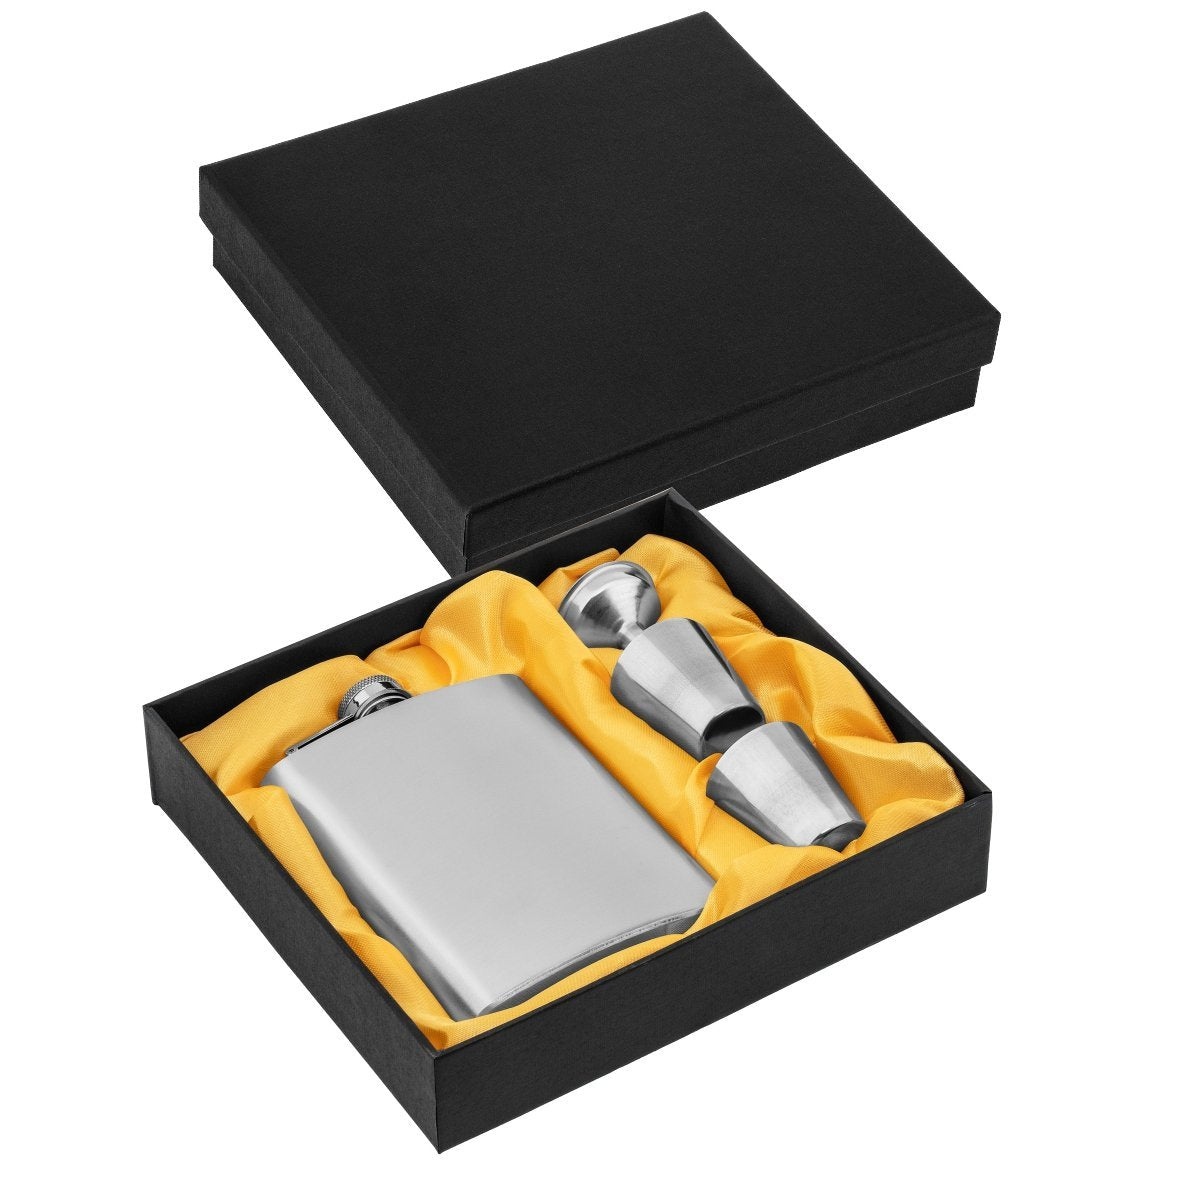 Stainless Steel Gift Set, 8 oz Hip Flask, Two Shot Glasses and Funnel